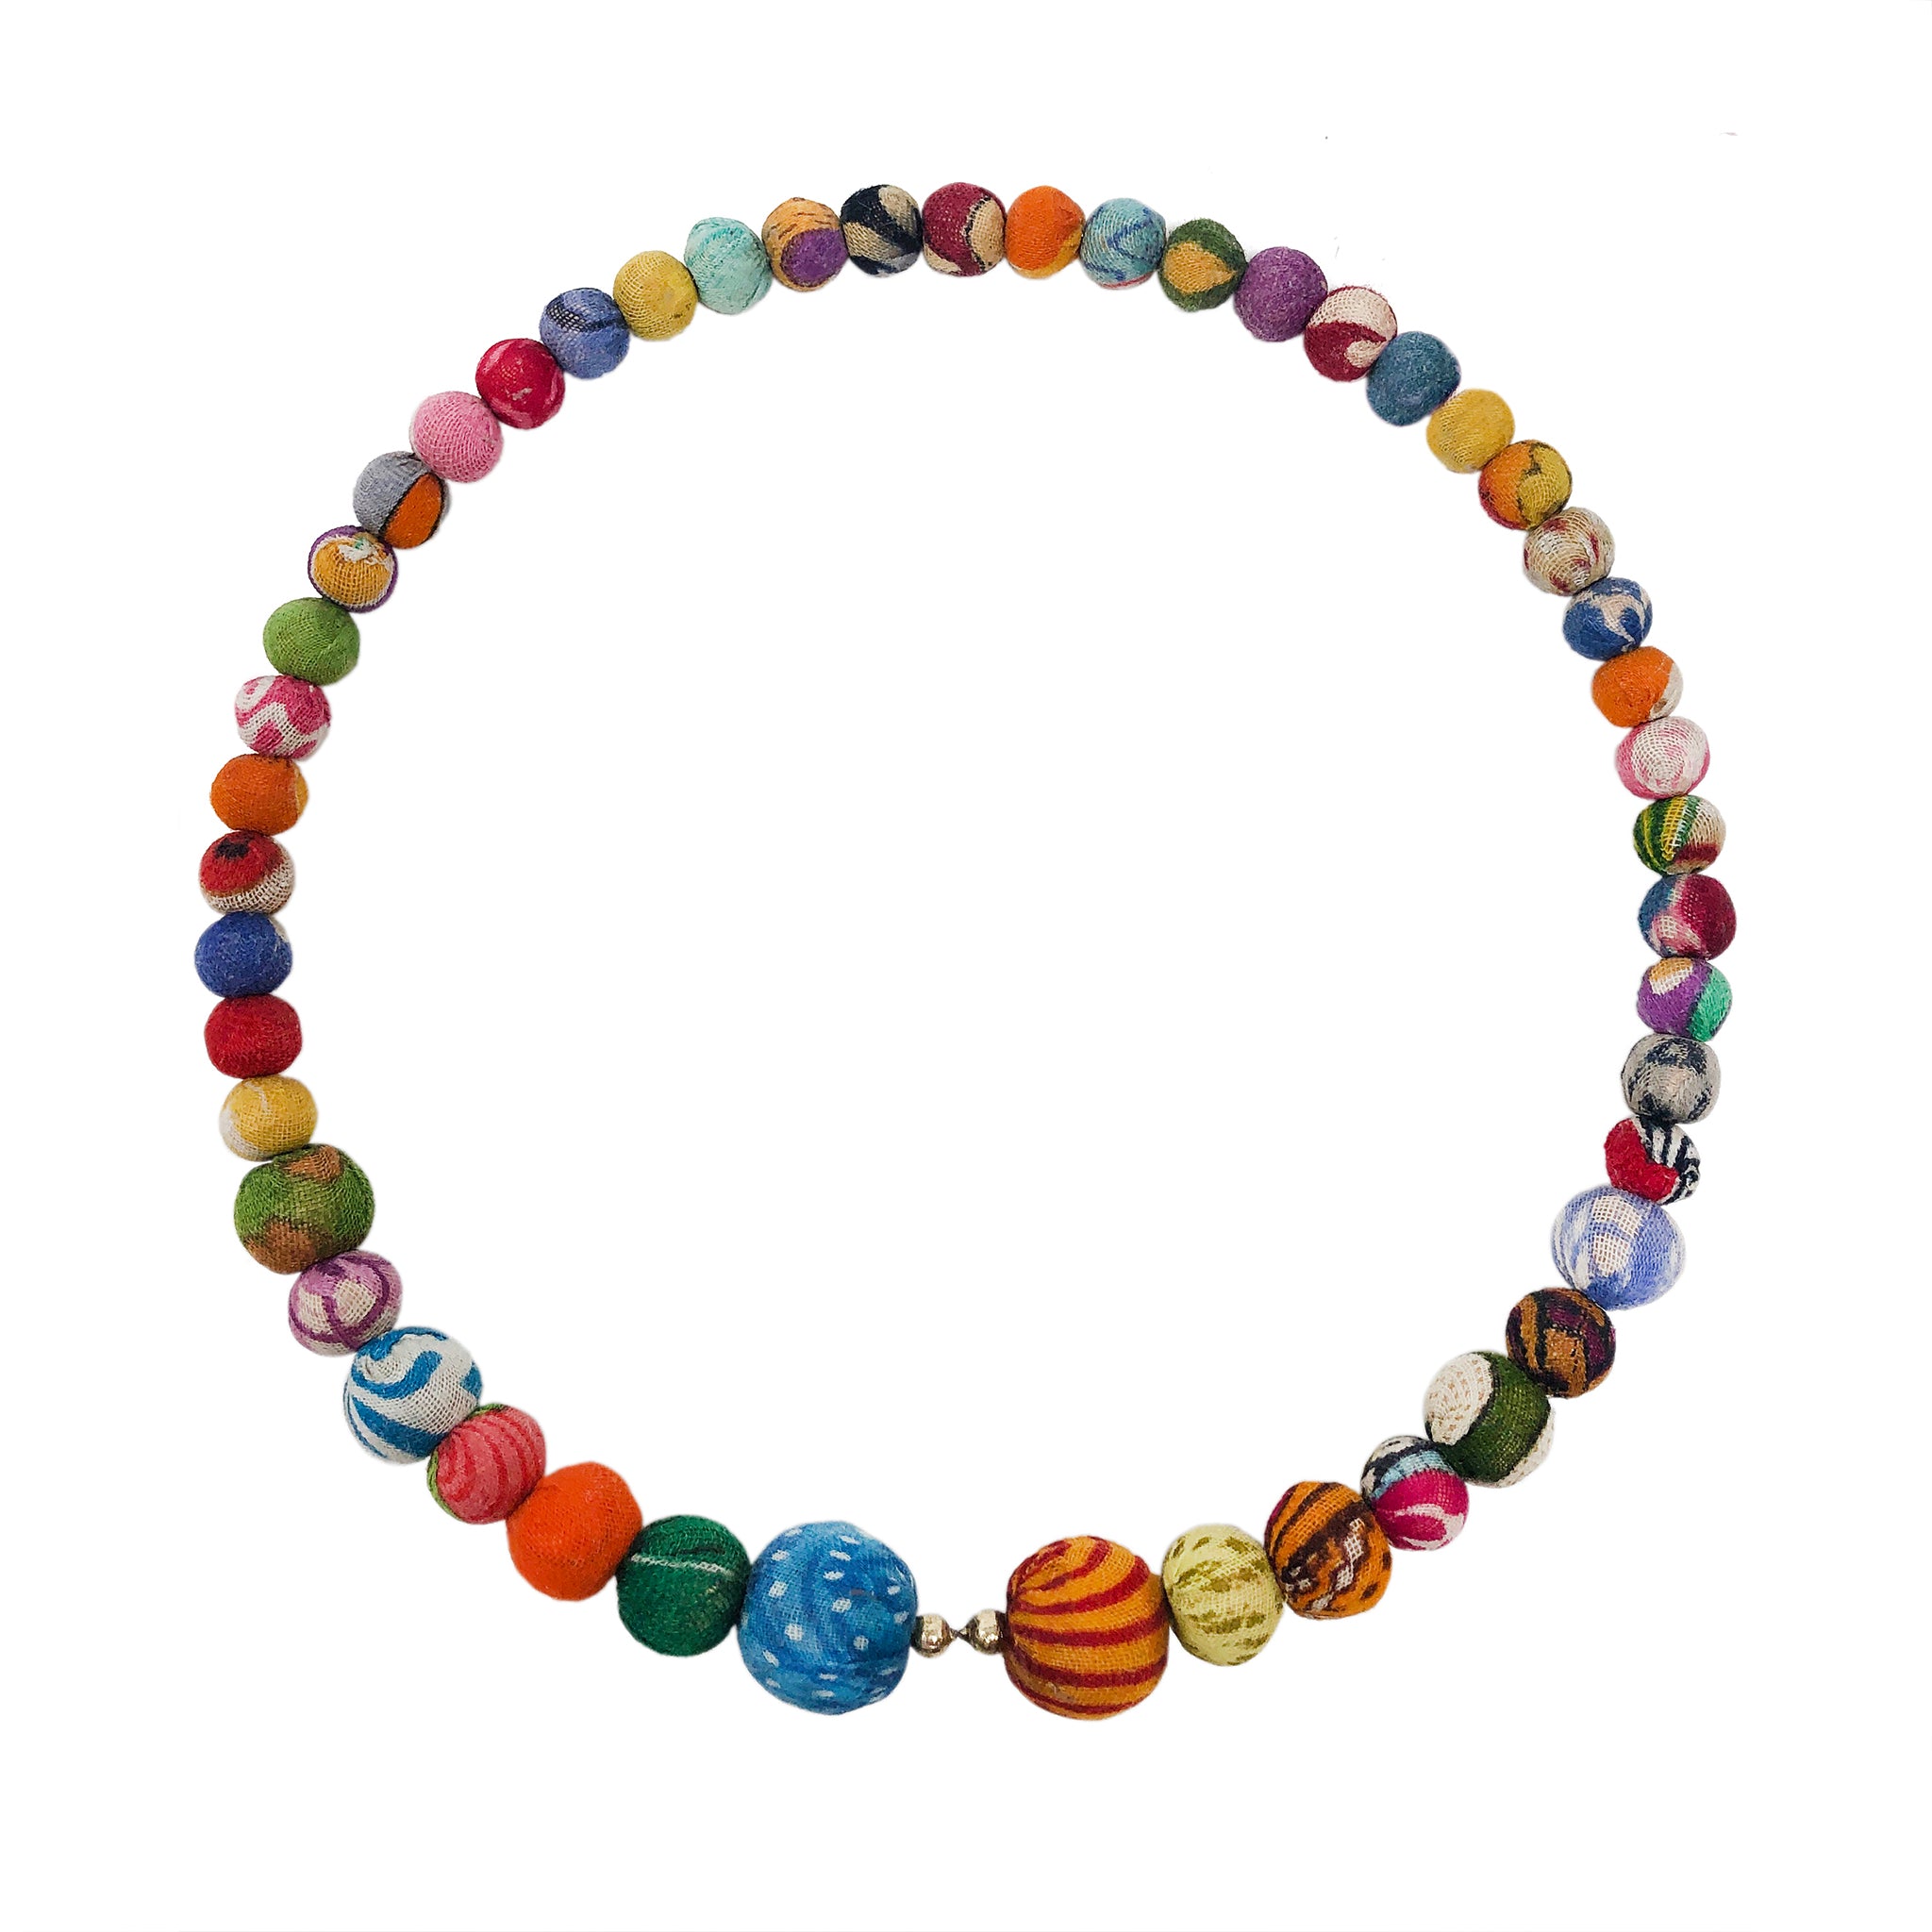 A circle of colorful textile-wrapped beads on a memory wire form this classic choker silhouette.